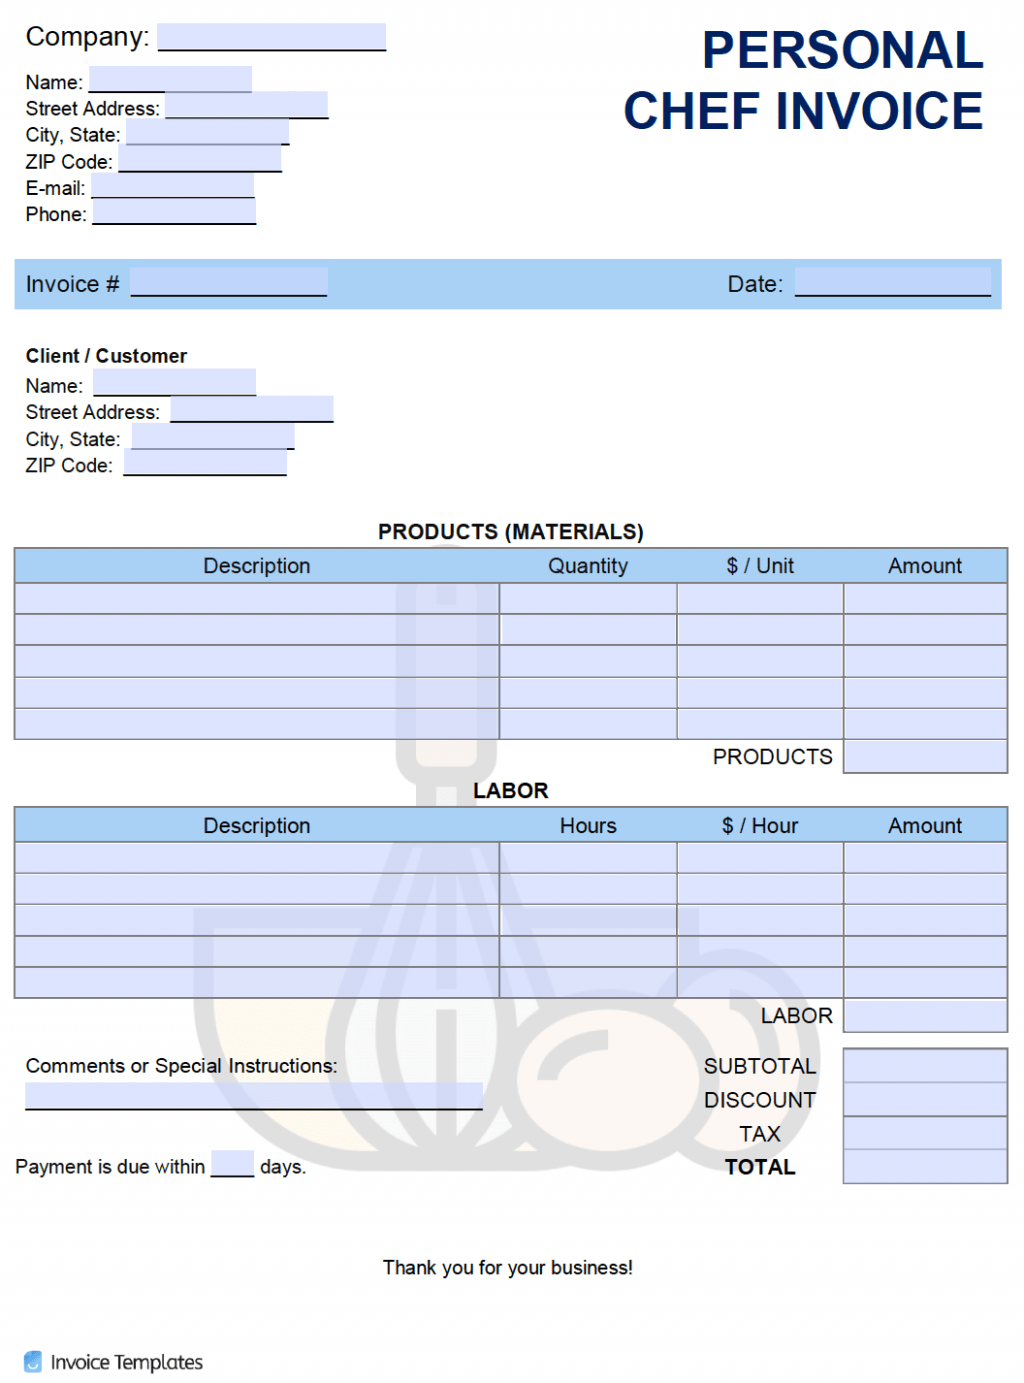 Printable Self Employed Chef Invoice Template PDF